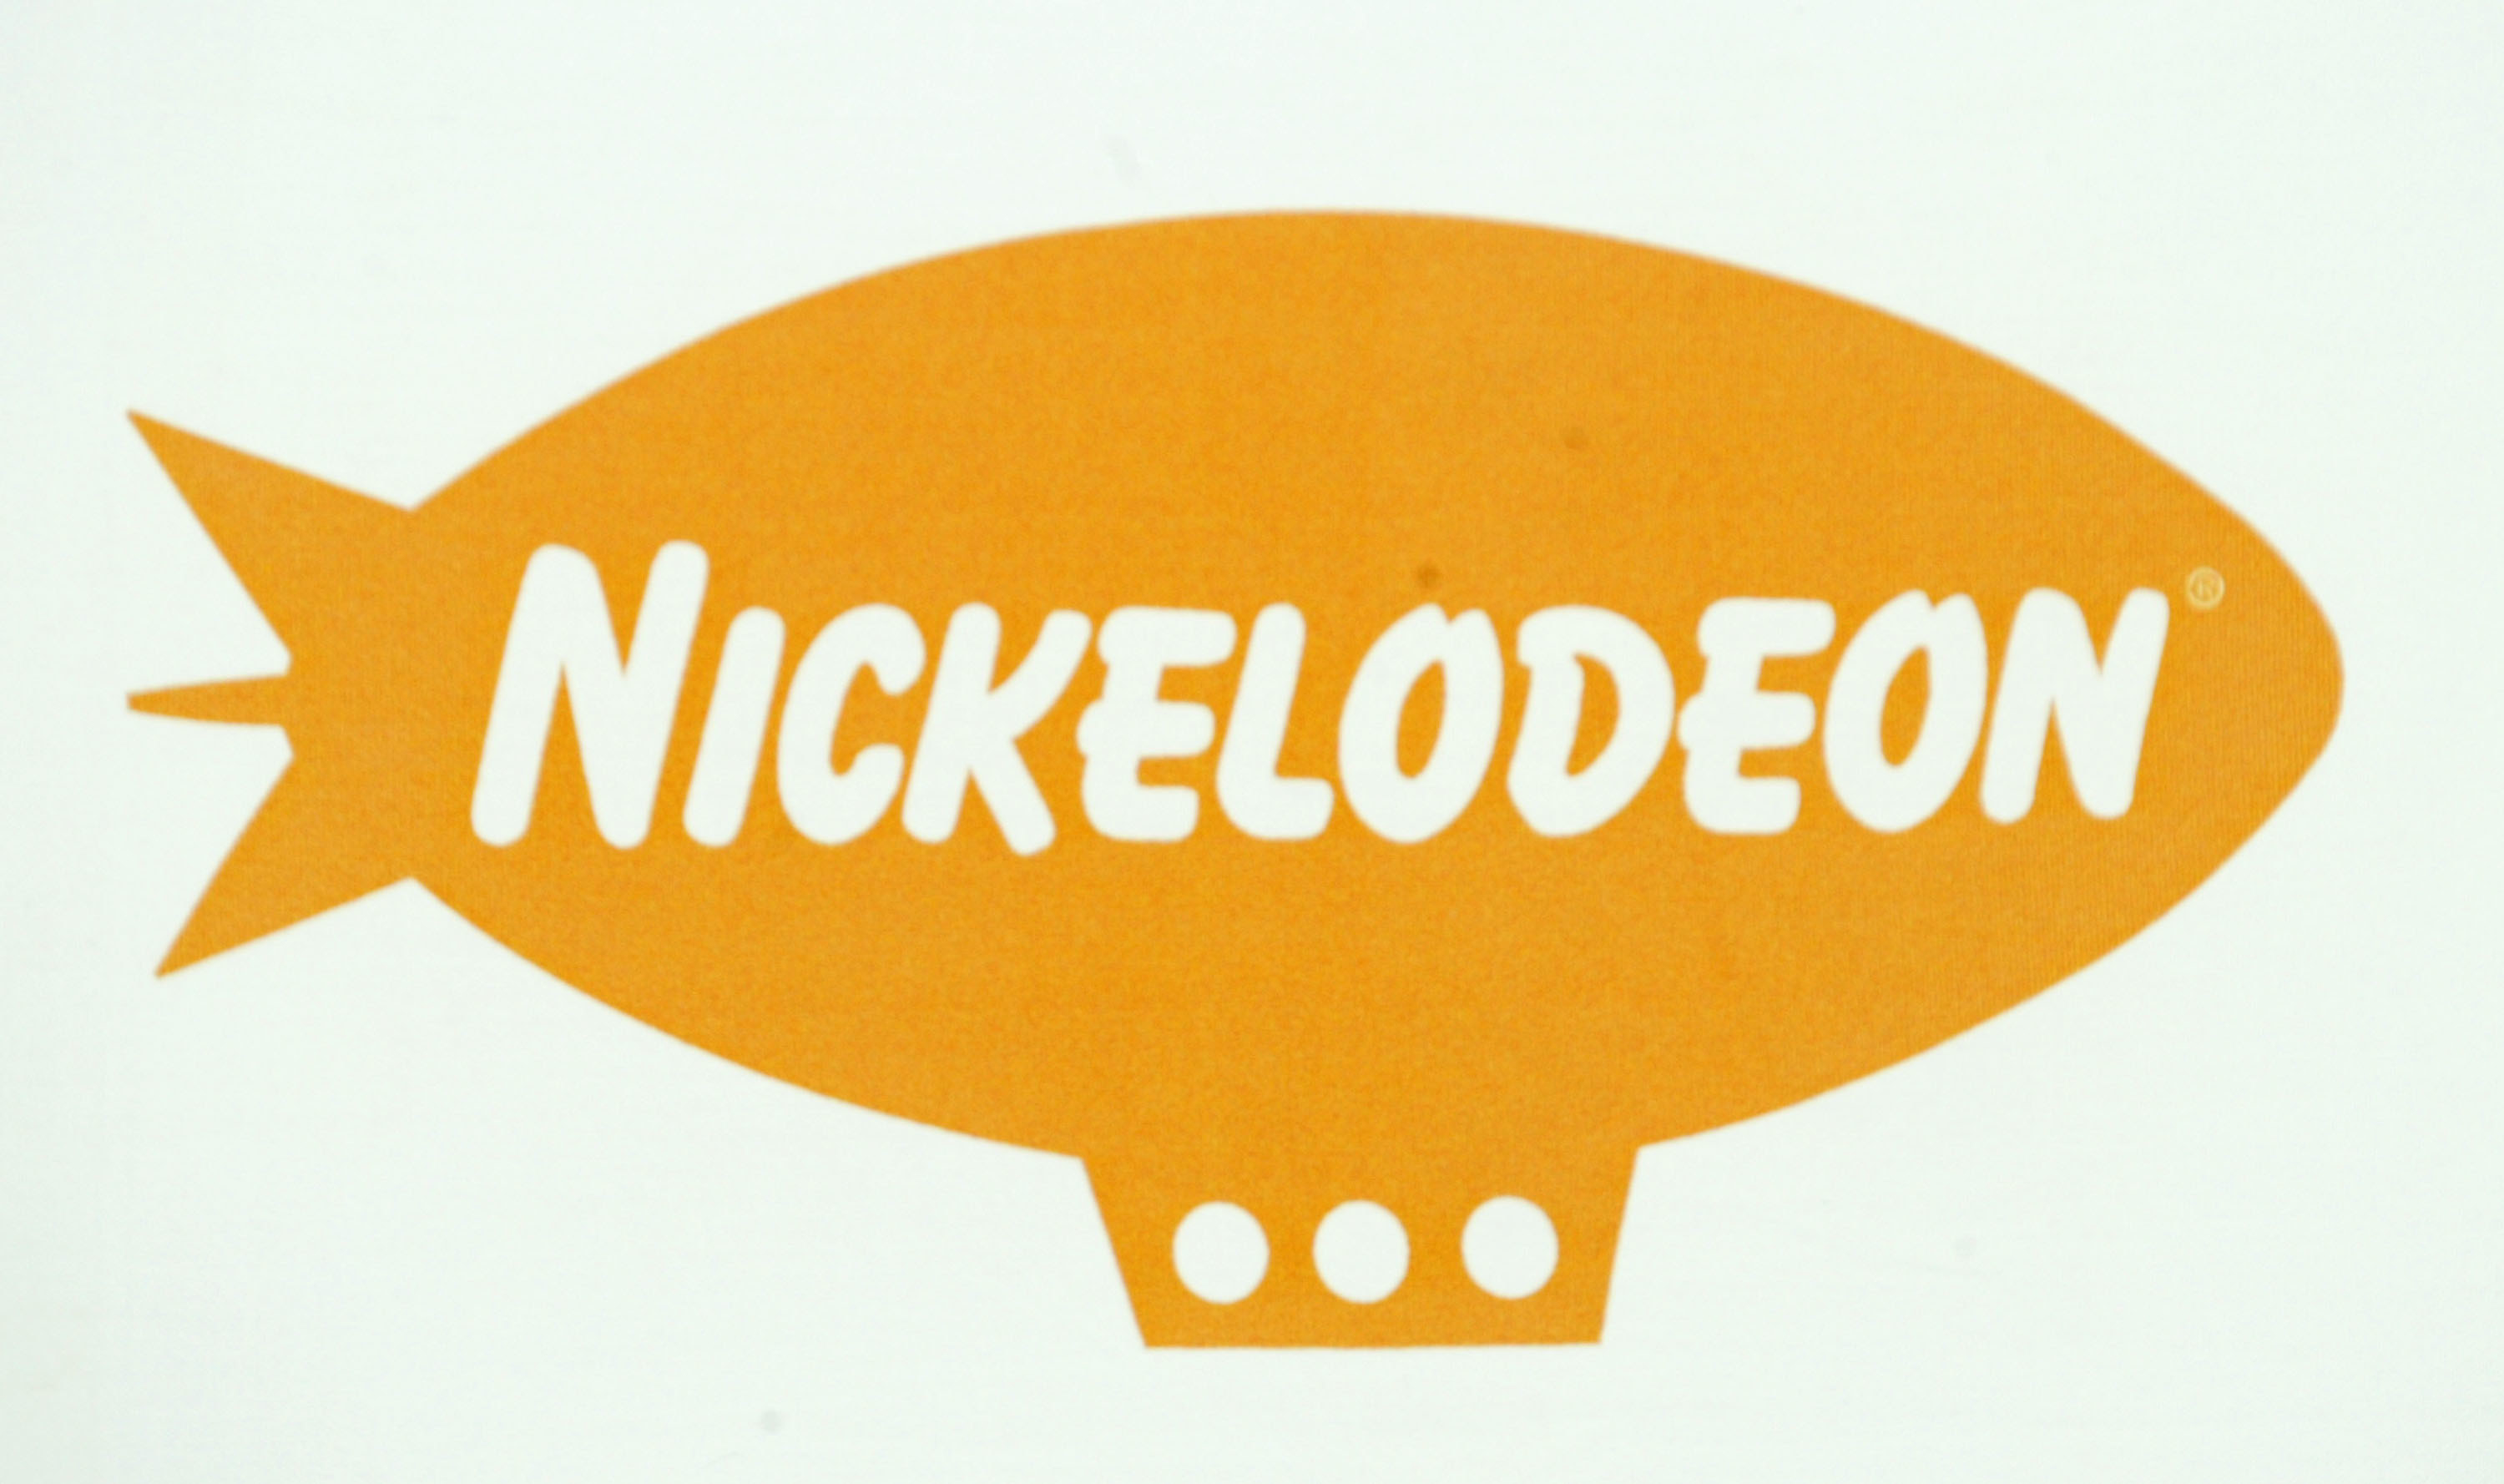 The Nickelodeon logo which is a blimp with Nickelodeon written on it